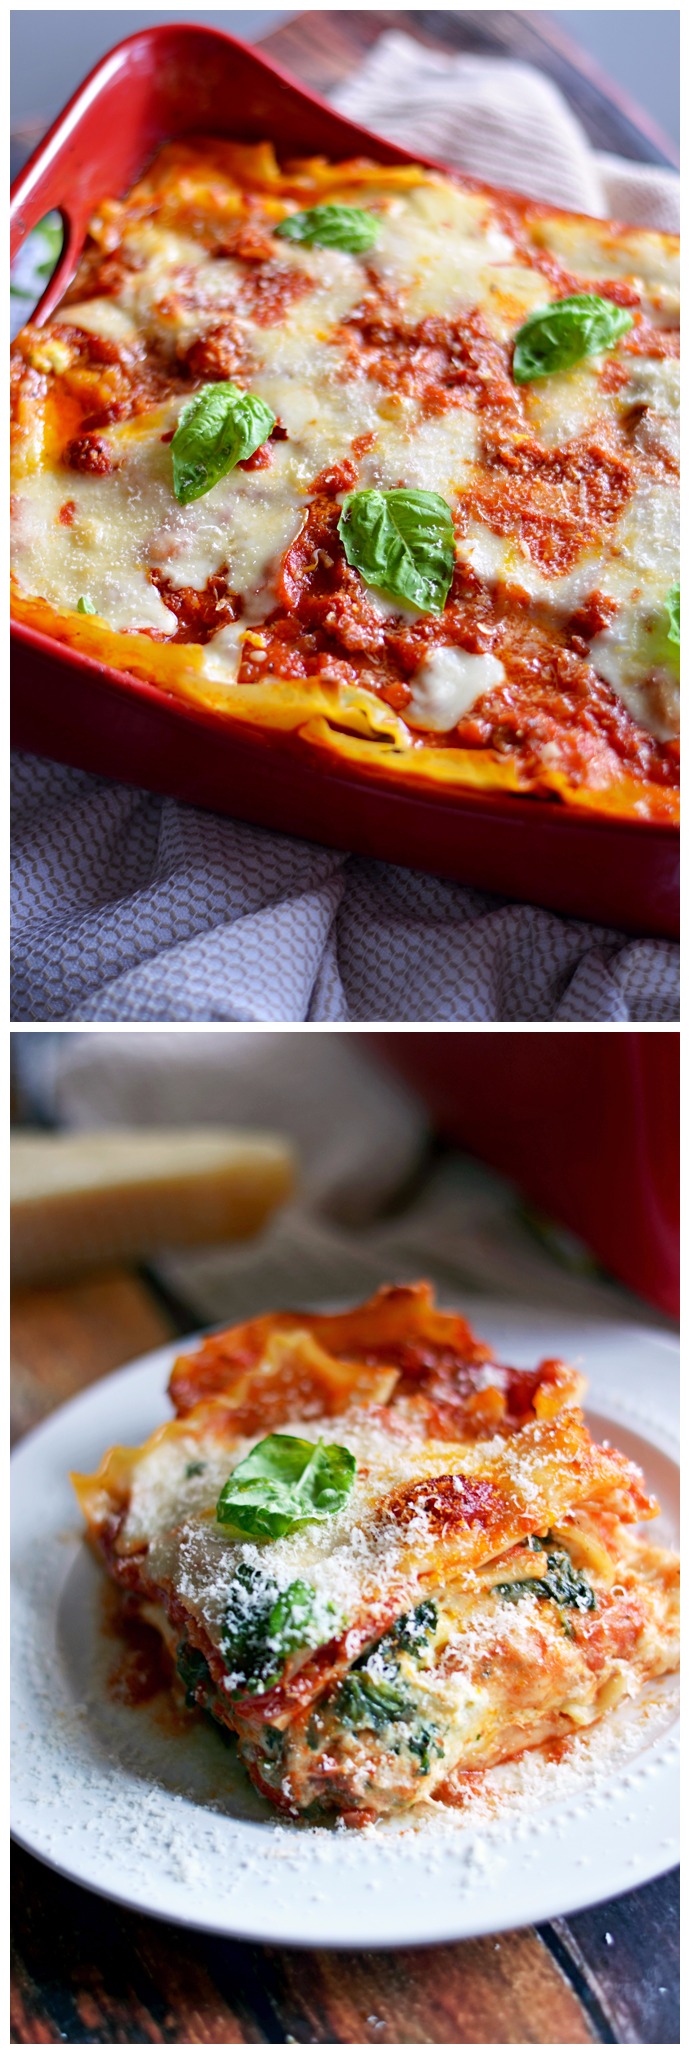 The Four Cheese Sausage & Spinach Lasagna